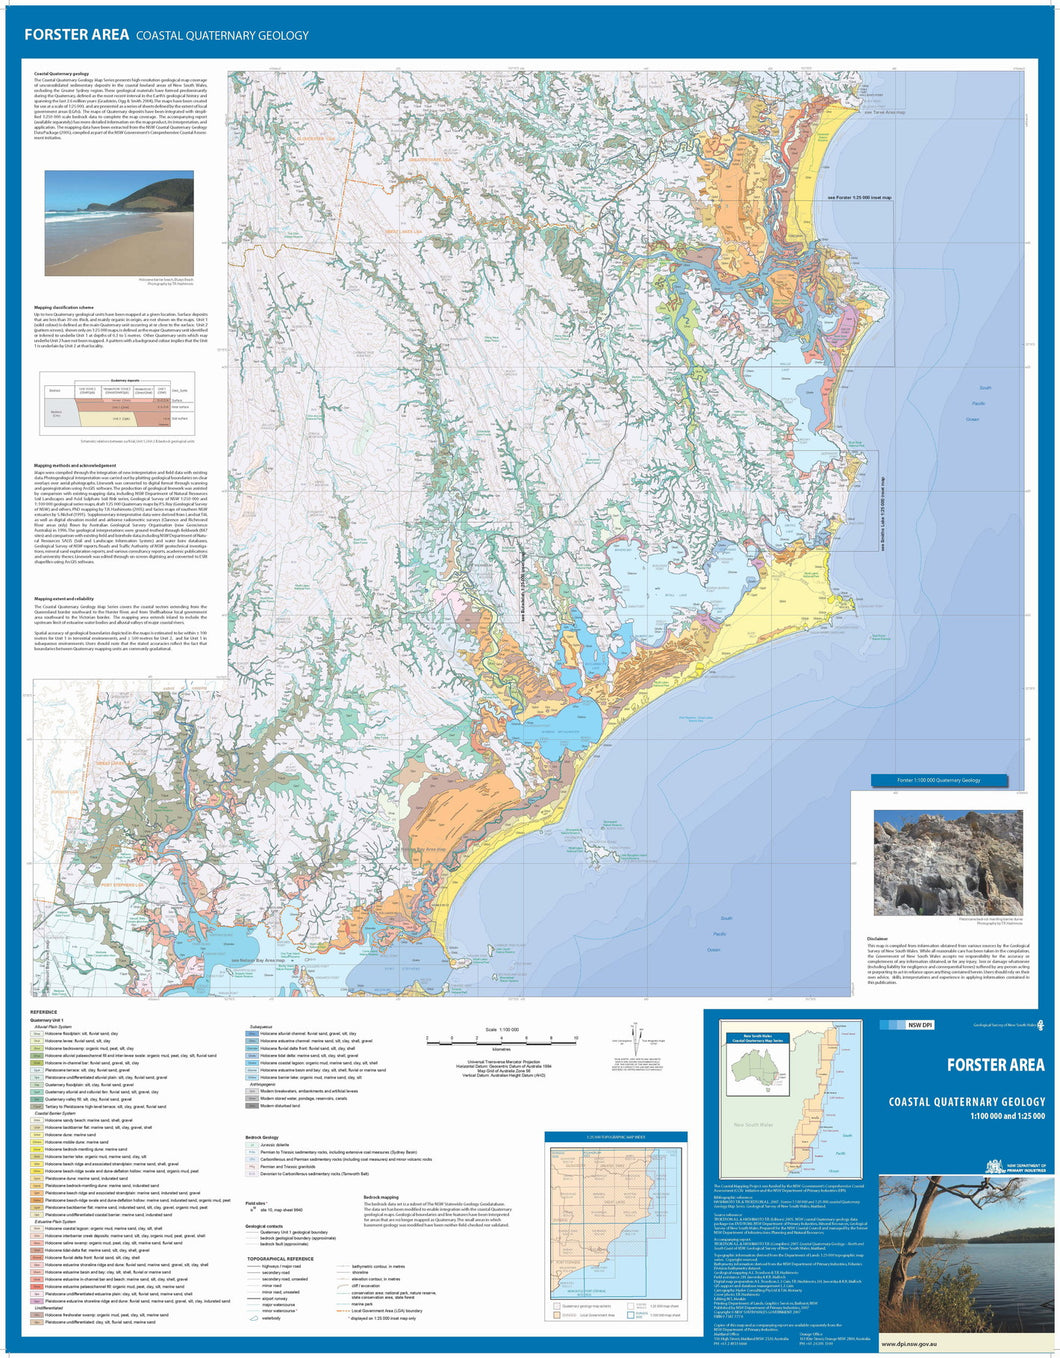 Image of Forster Area Coastal Quaternary Geology map